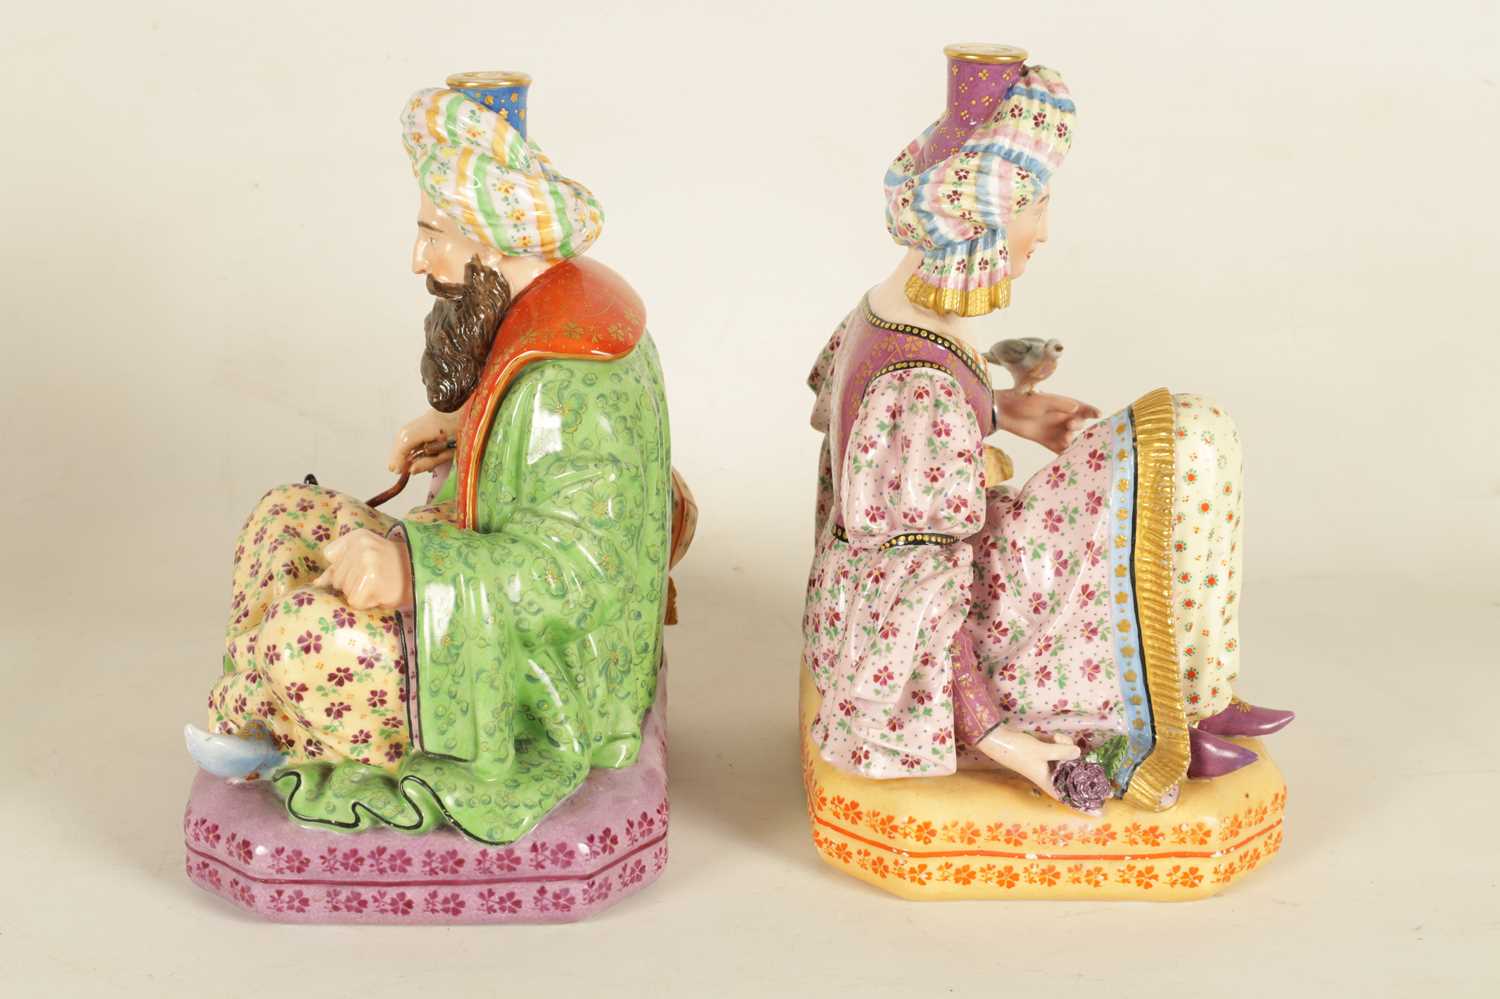 A PAIR OF 19TH CENTURY FRENCH FIGURAL PORCELAIN PERFUME BOTTLES BY JACOB PETIT - Image 9 of 18